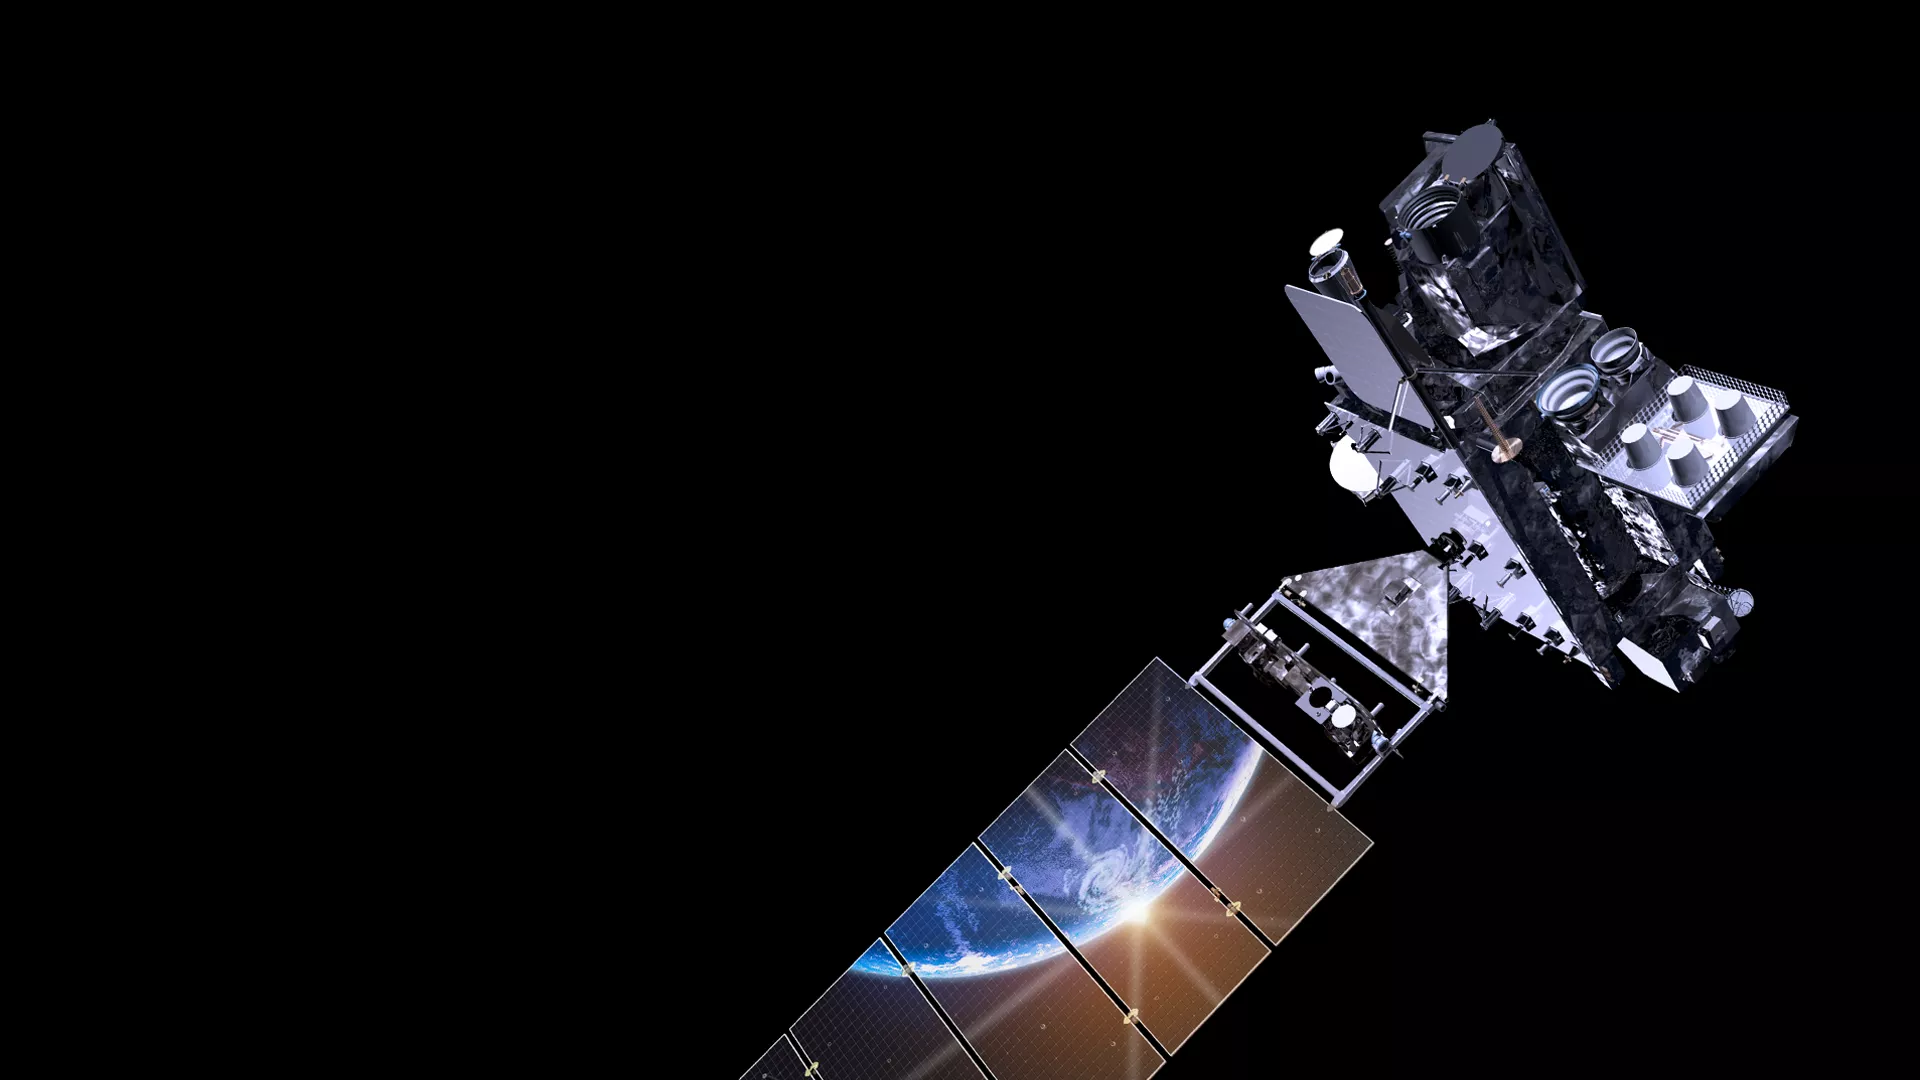 Image of GOES-T